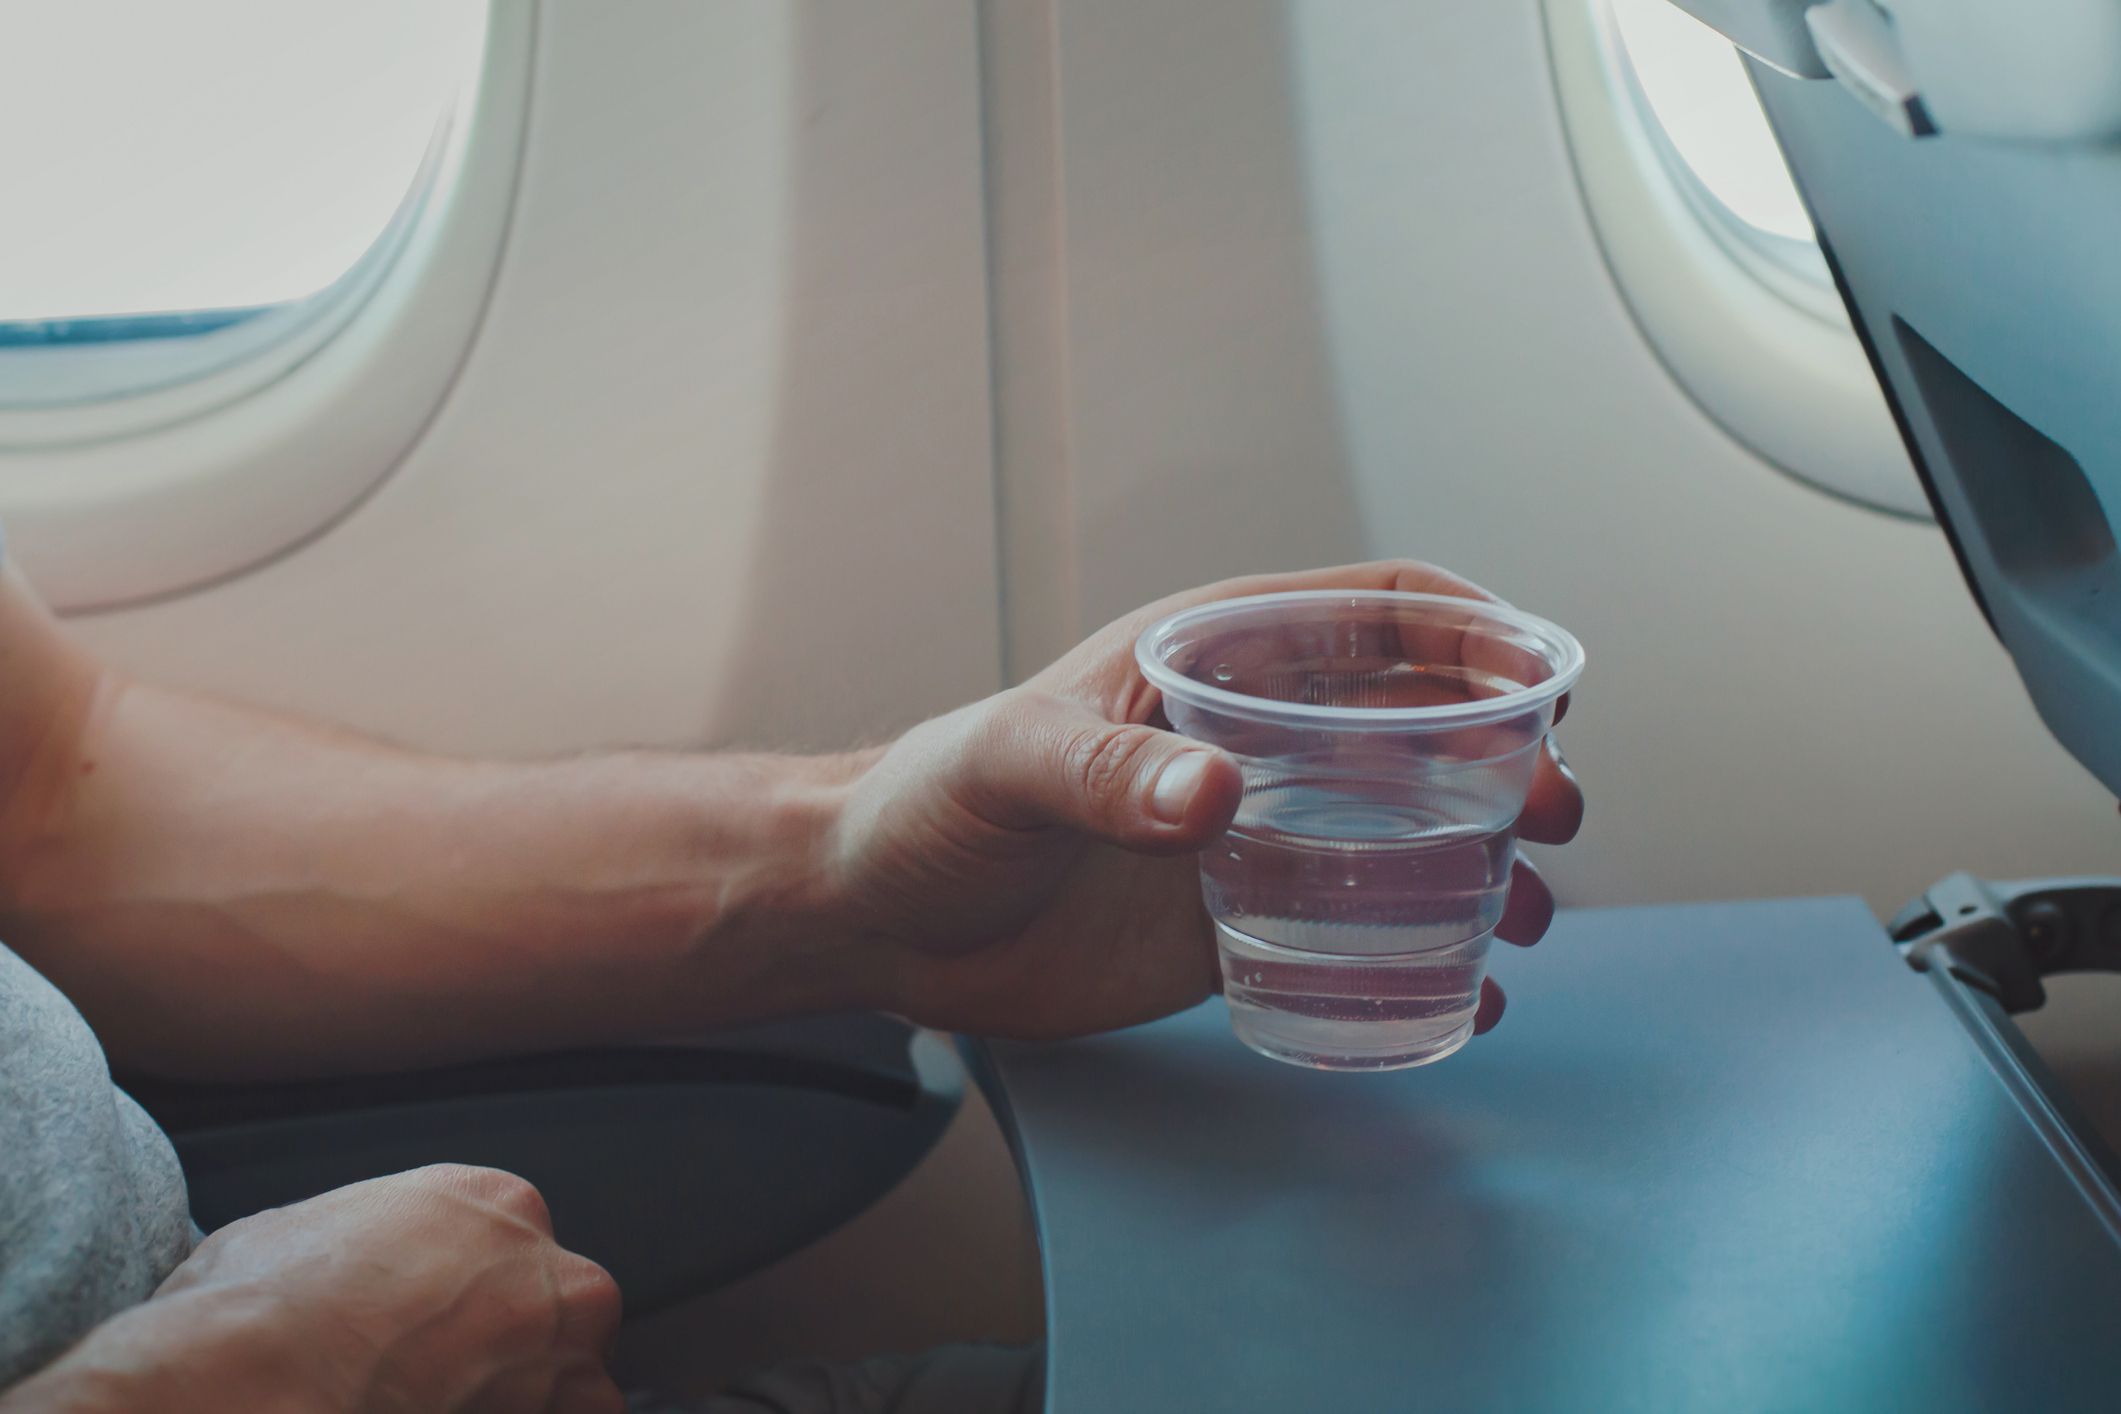 <p>According to flight attendants, you <a href="https://time.com/4978498/airline-drinking-water-bacteria/">shouldn't drink tap water on an airplane</a>. The tanks that hold the water are rarely cleaned, and many of the flight attendants won't drink the water themselves. That's good enough reason for us to bring a bottle of water on board.</p>